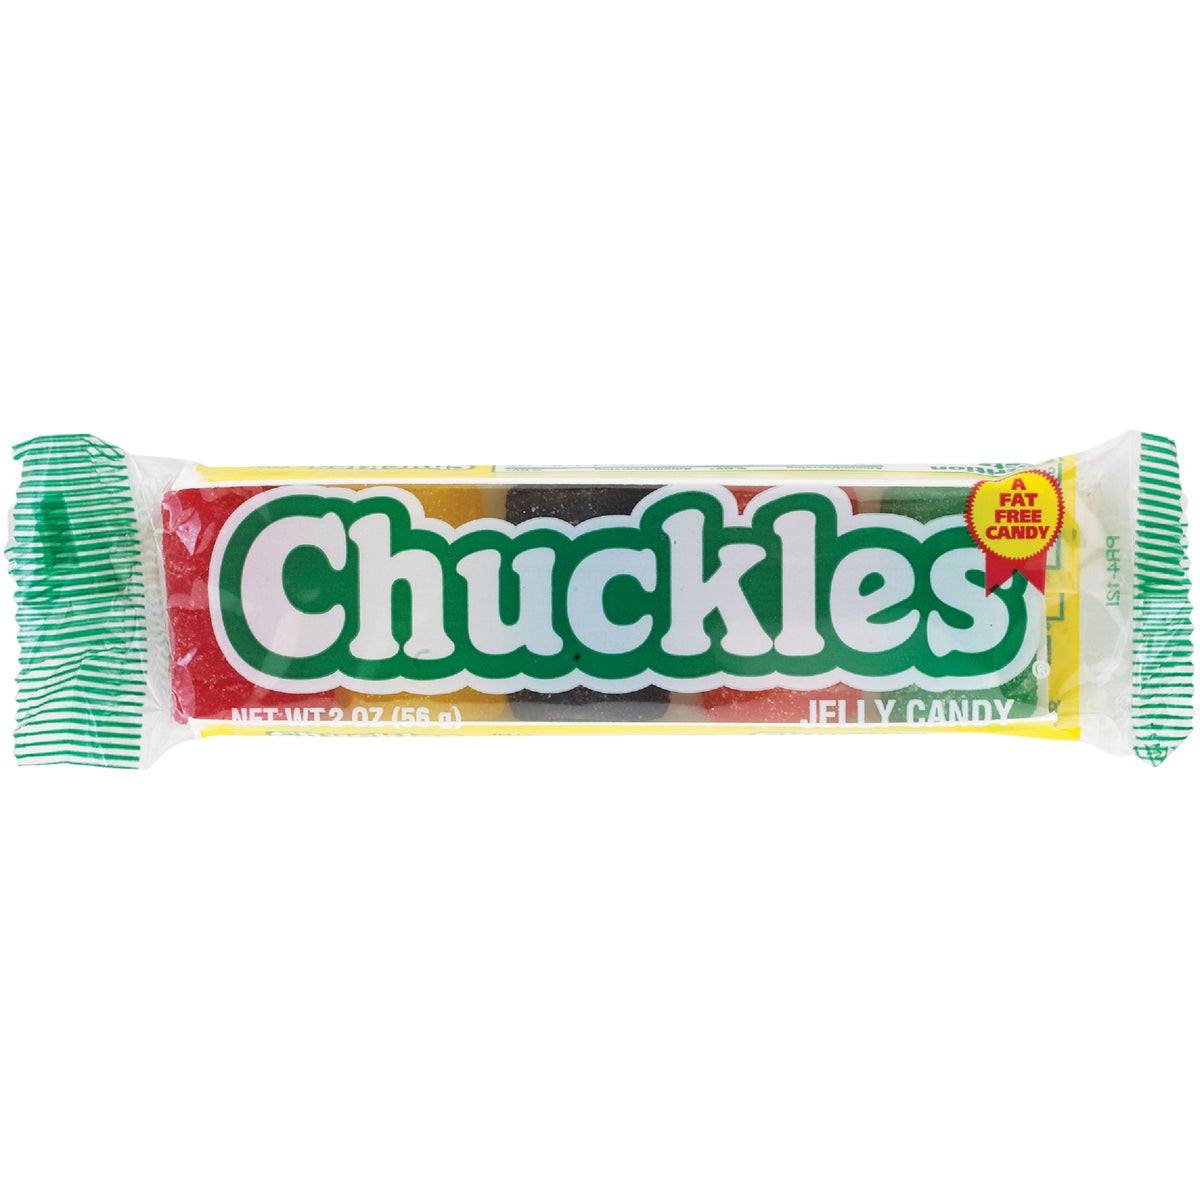 Item 971405, Chuckles jelly candy bar is a totally fat free candy.